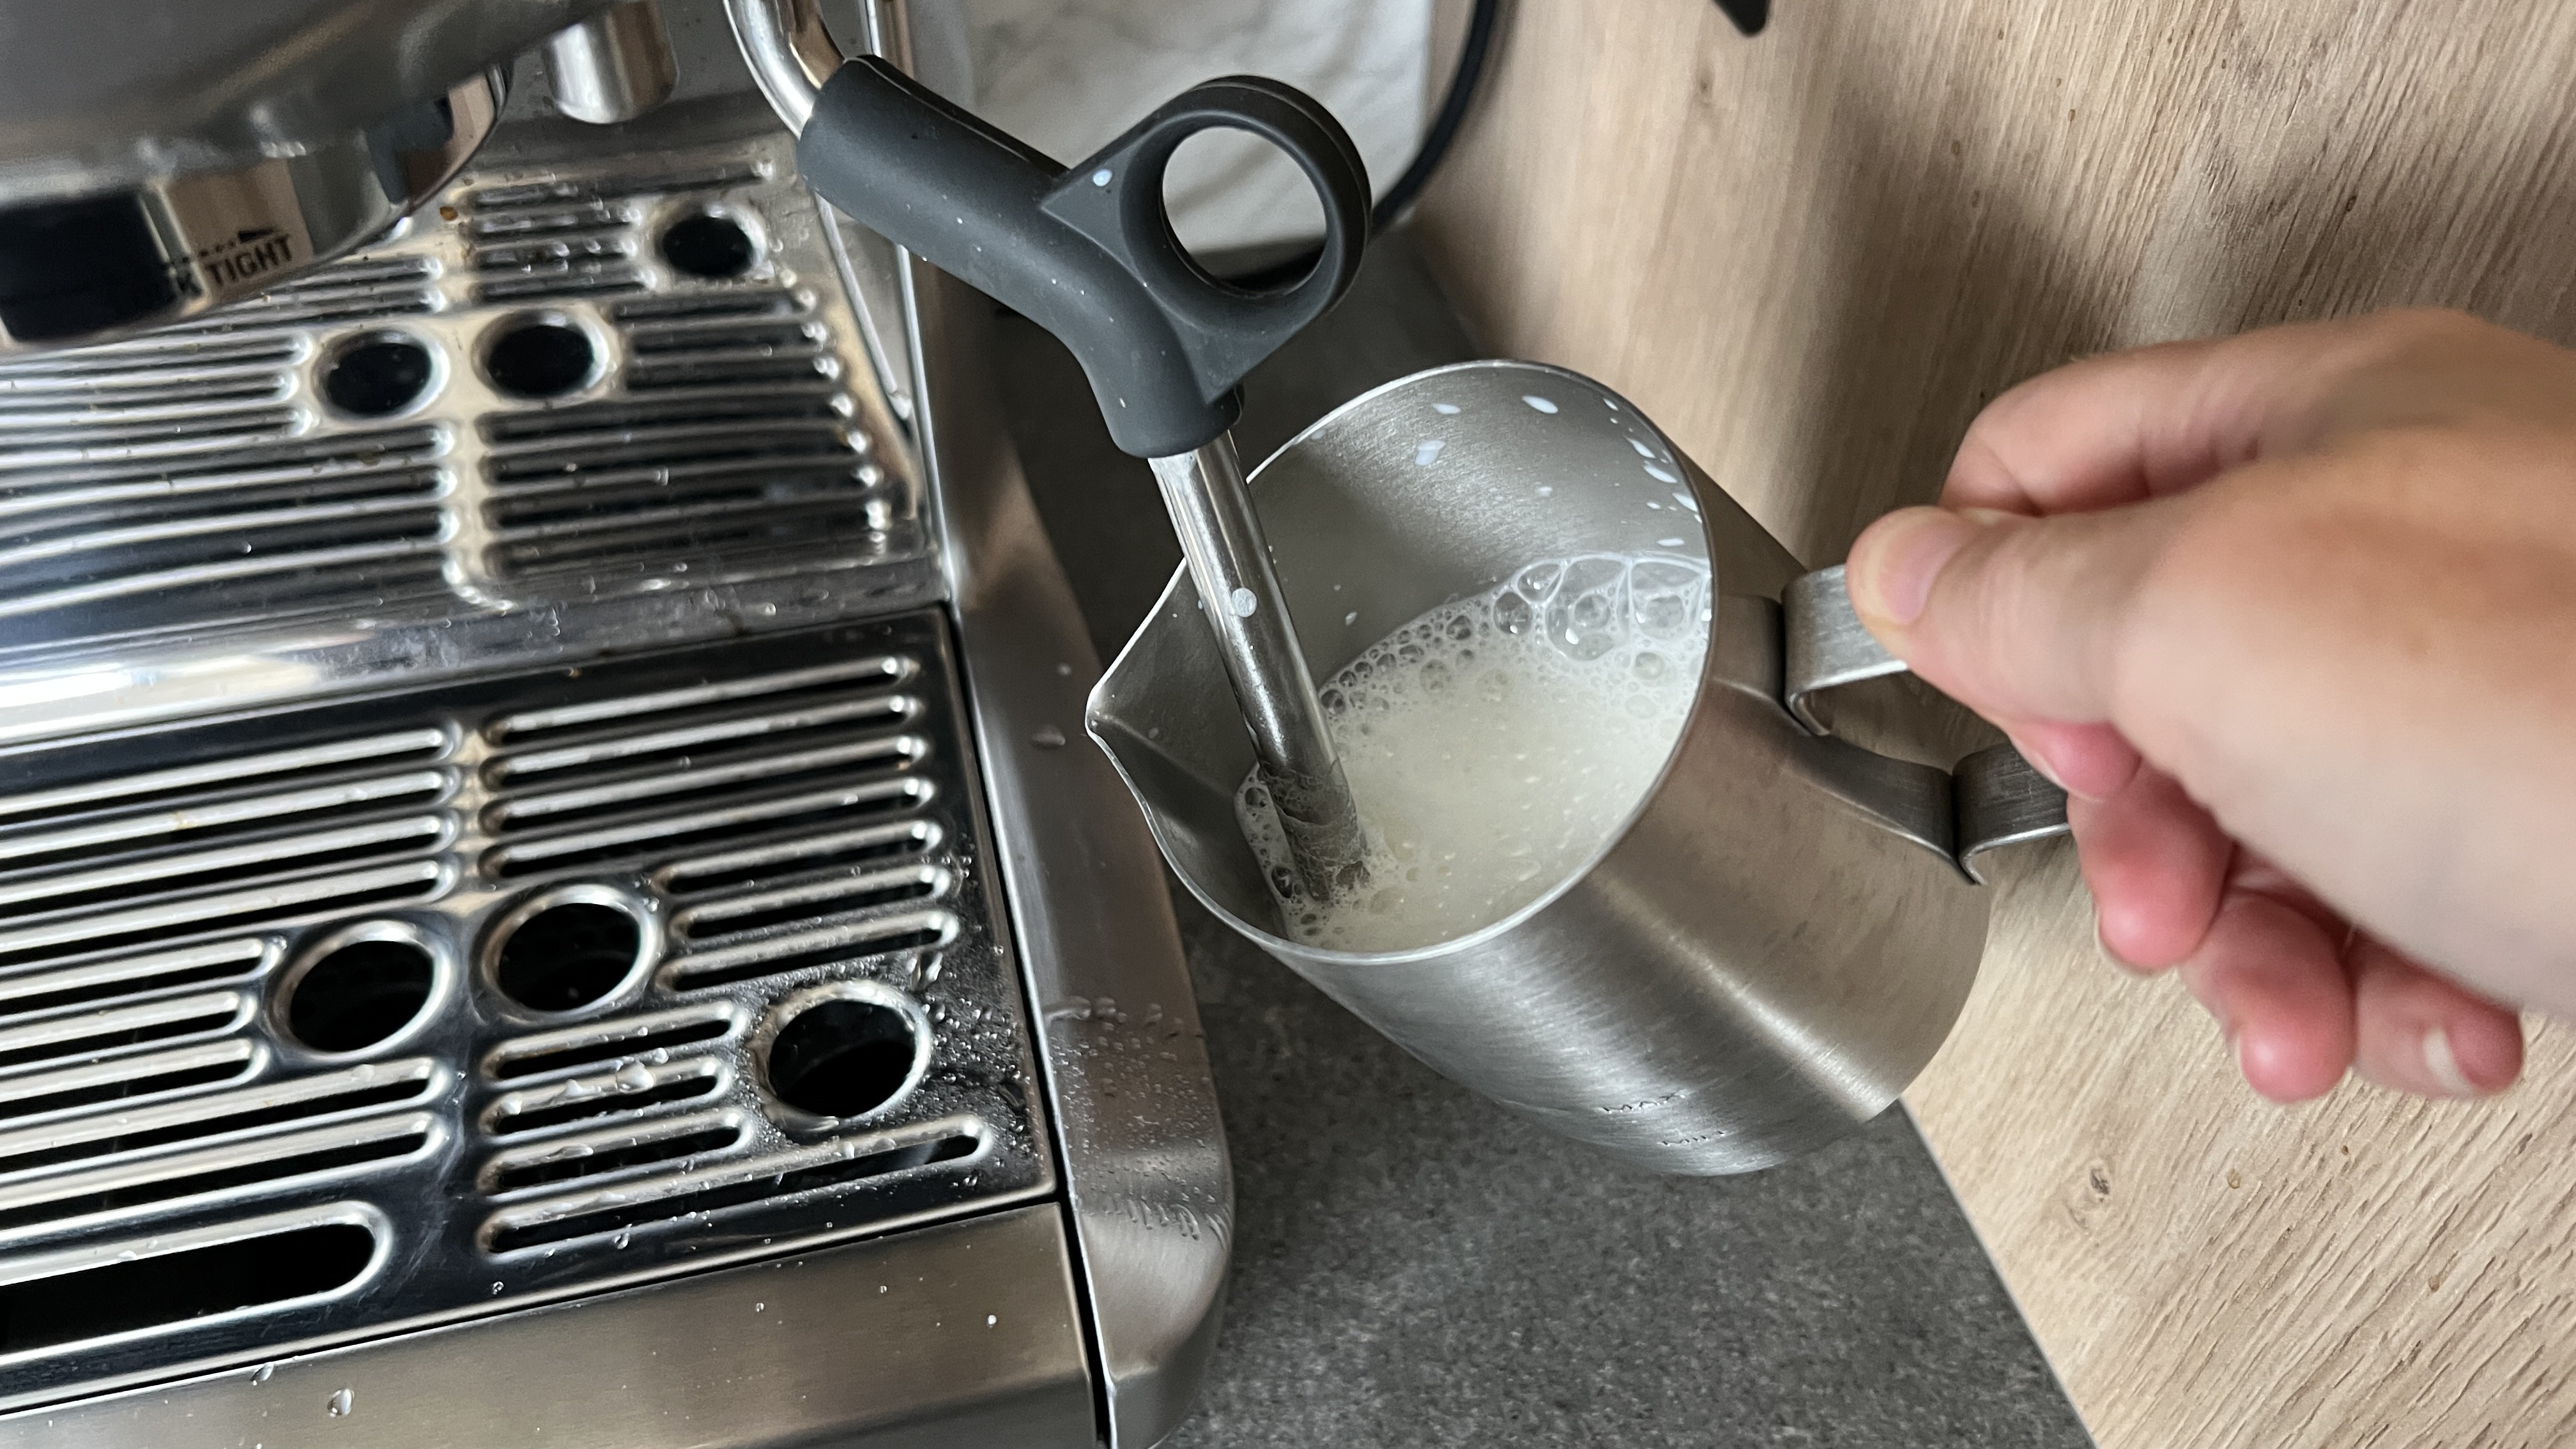 steaming milk with a steam wand